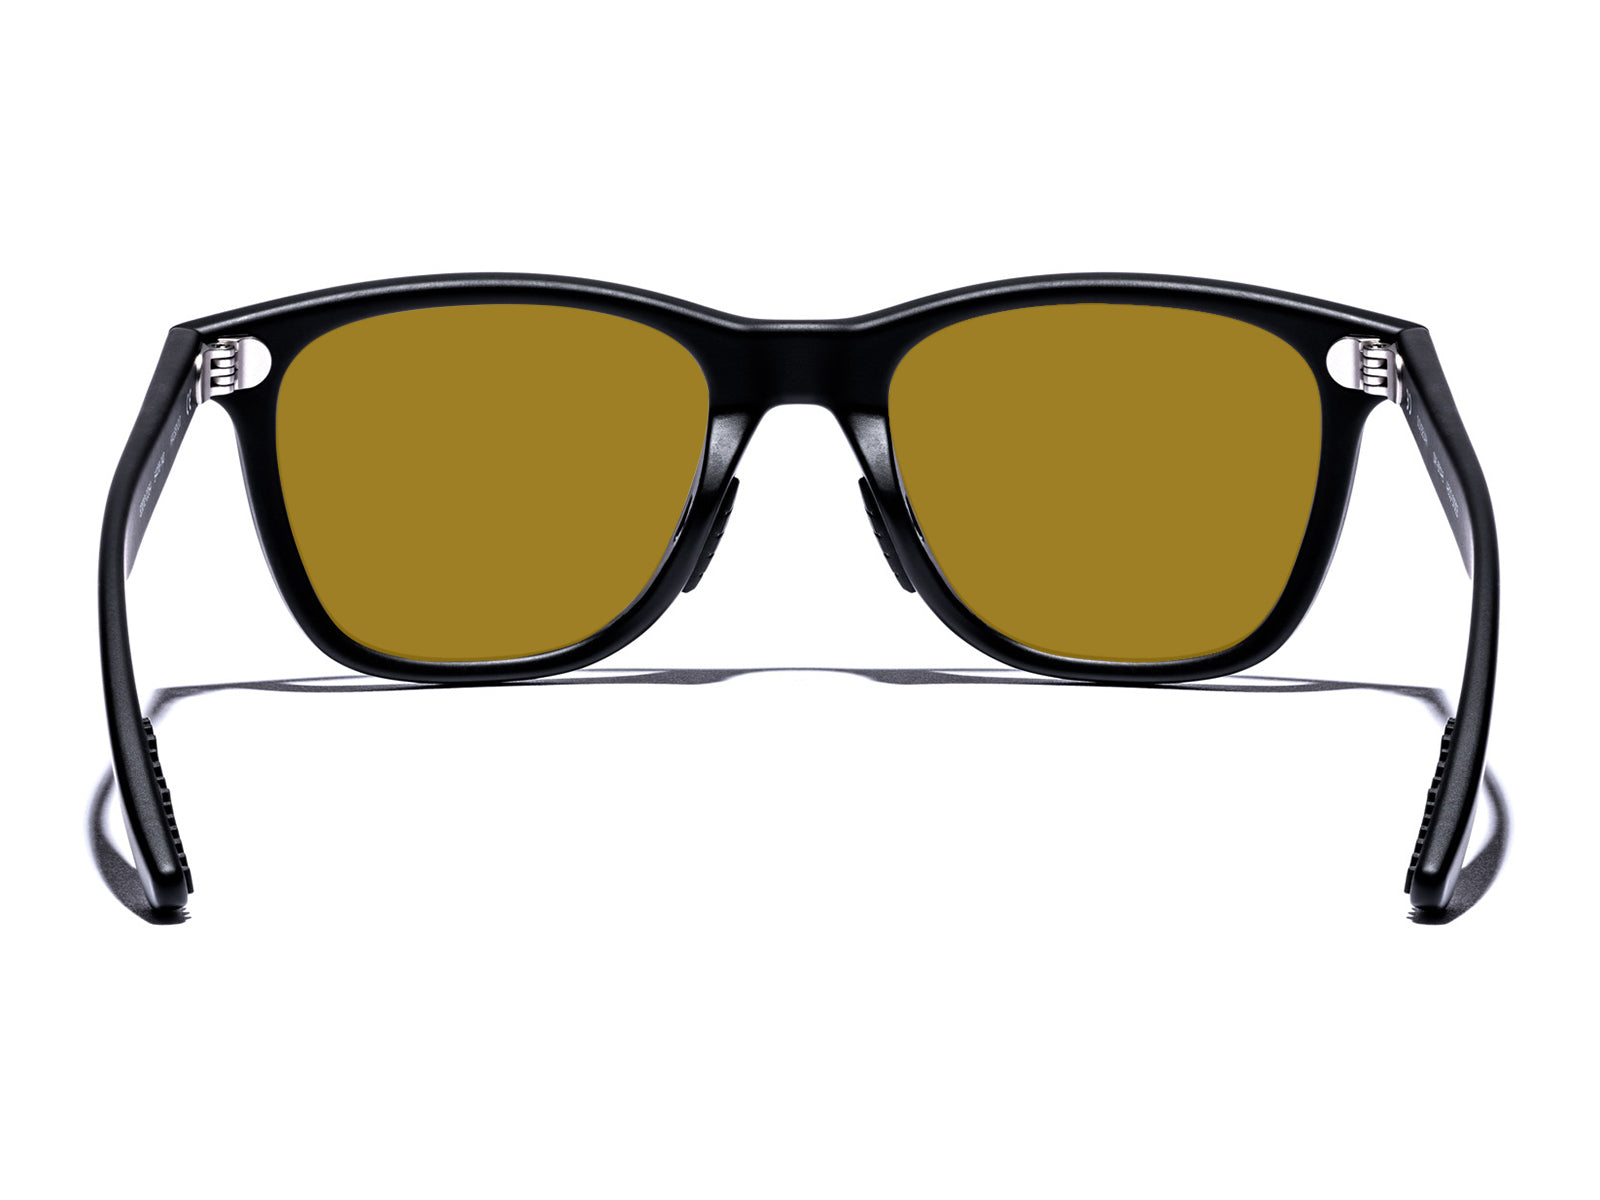 Roka adds more classic silhouettes to its performance sunglass